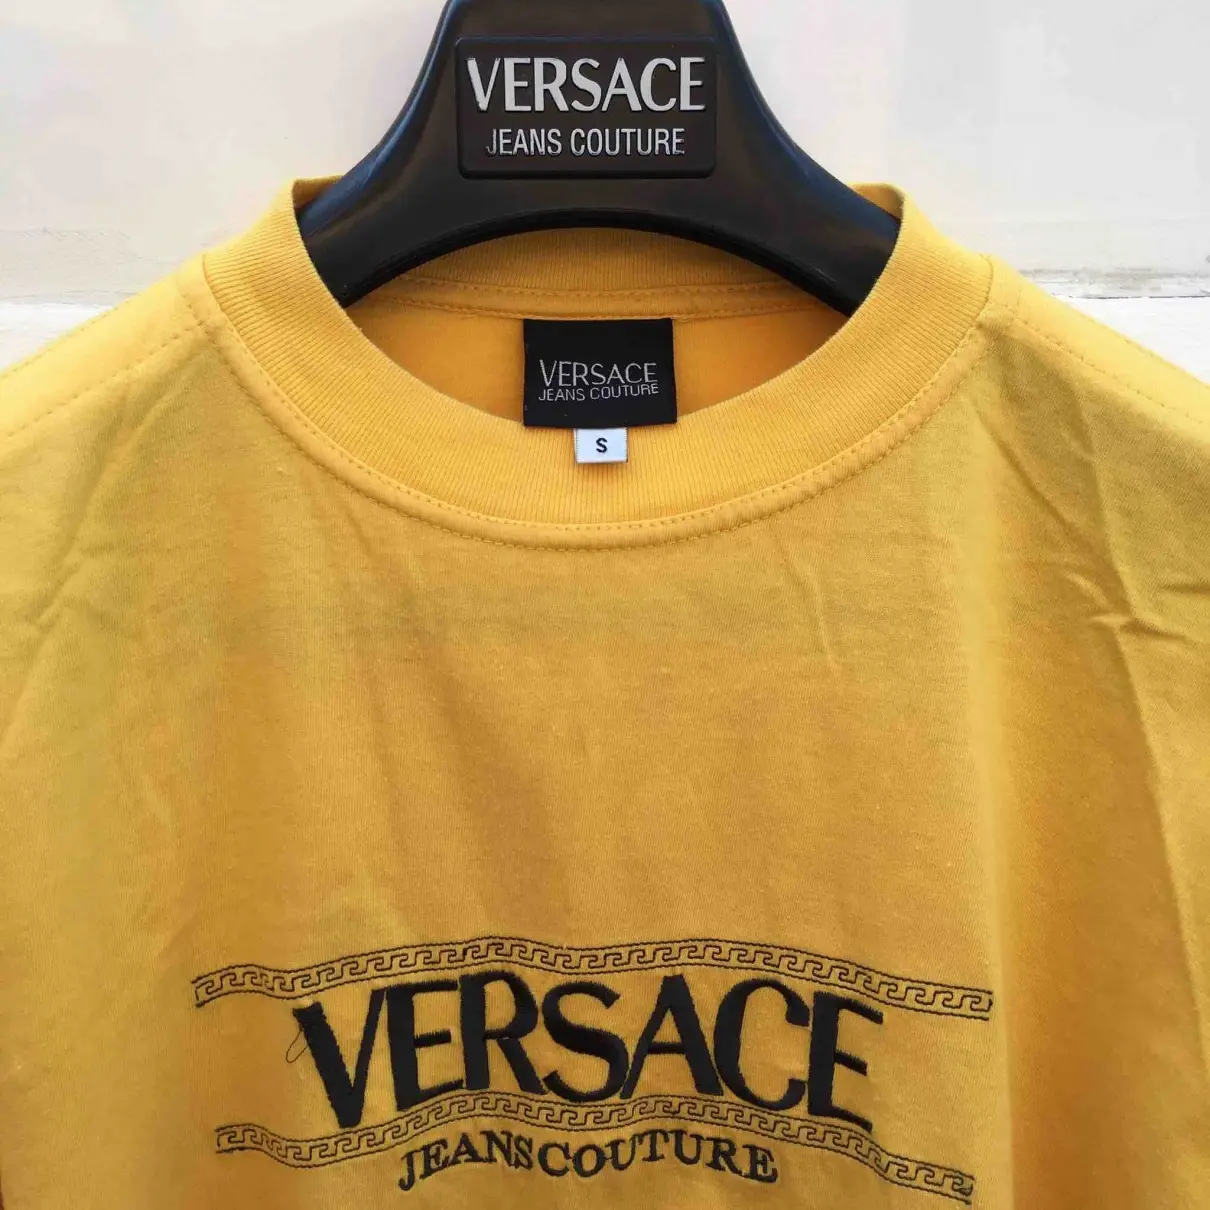 Buy Versace Jeans Couture T-shirt online